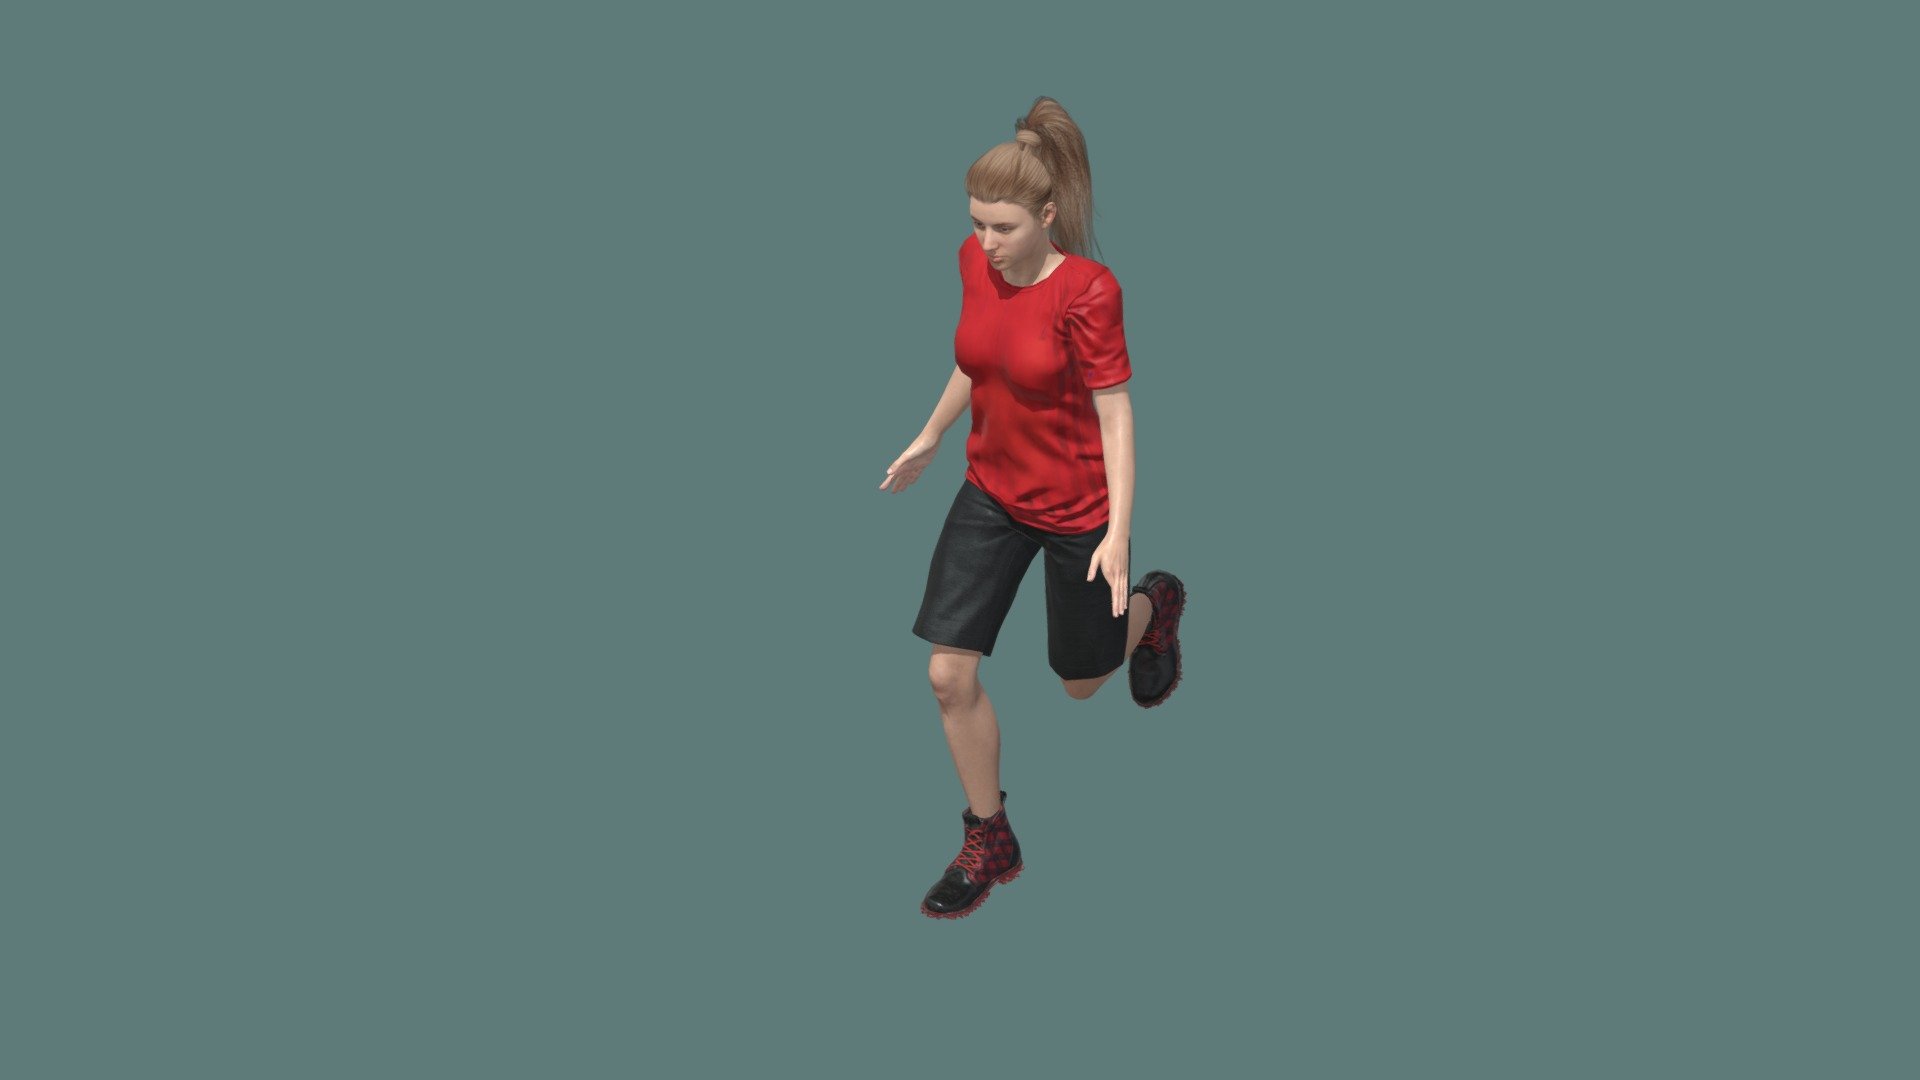 Female Player with her uniform ready for play - 3d Model character creator - Football Player Girl 2 - 3D model by RiverofCreative 3d model